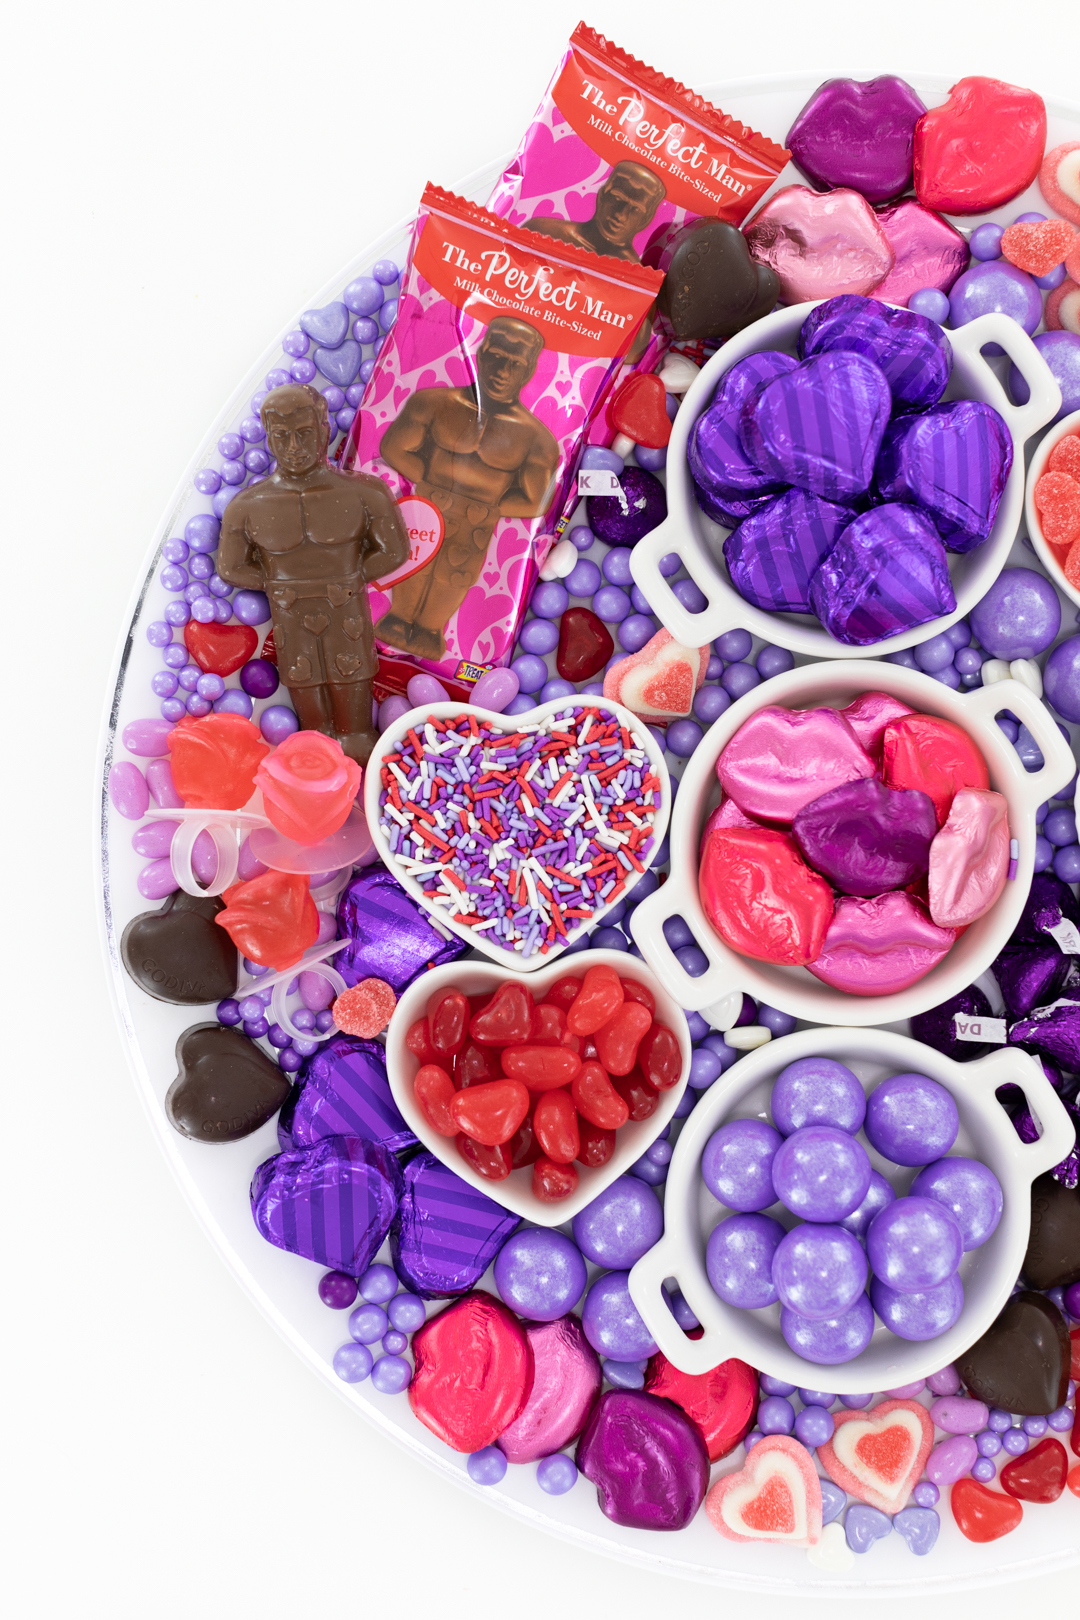 Galentine's Day Candy Tray with purple and red theme